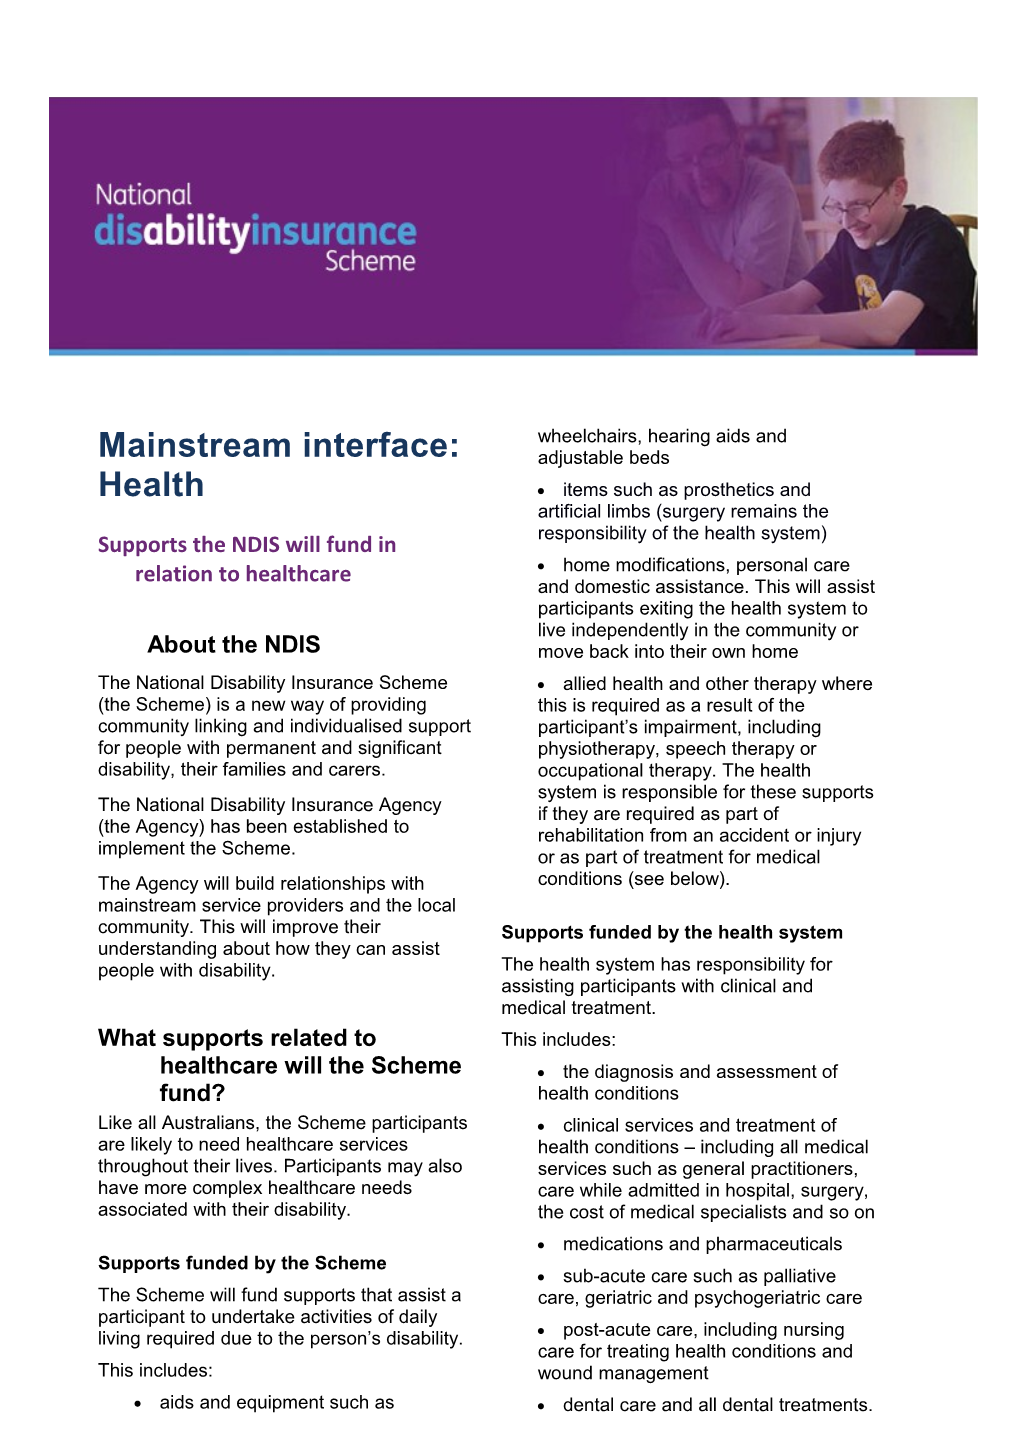 Fact Sheet: Supports the NDIS Will Fund in Relation to Healthcare